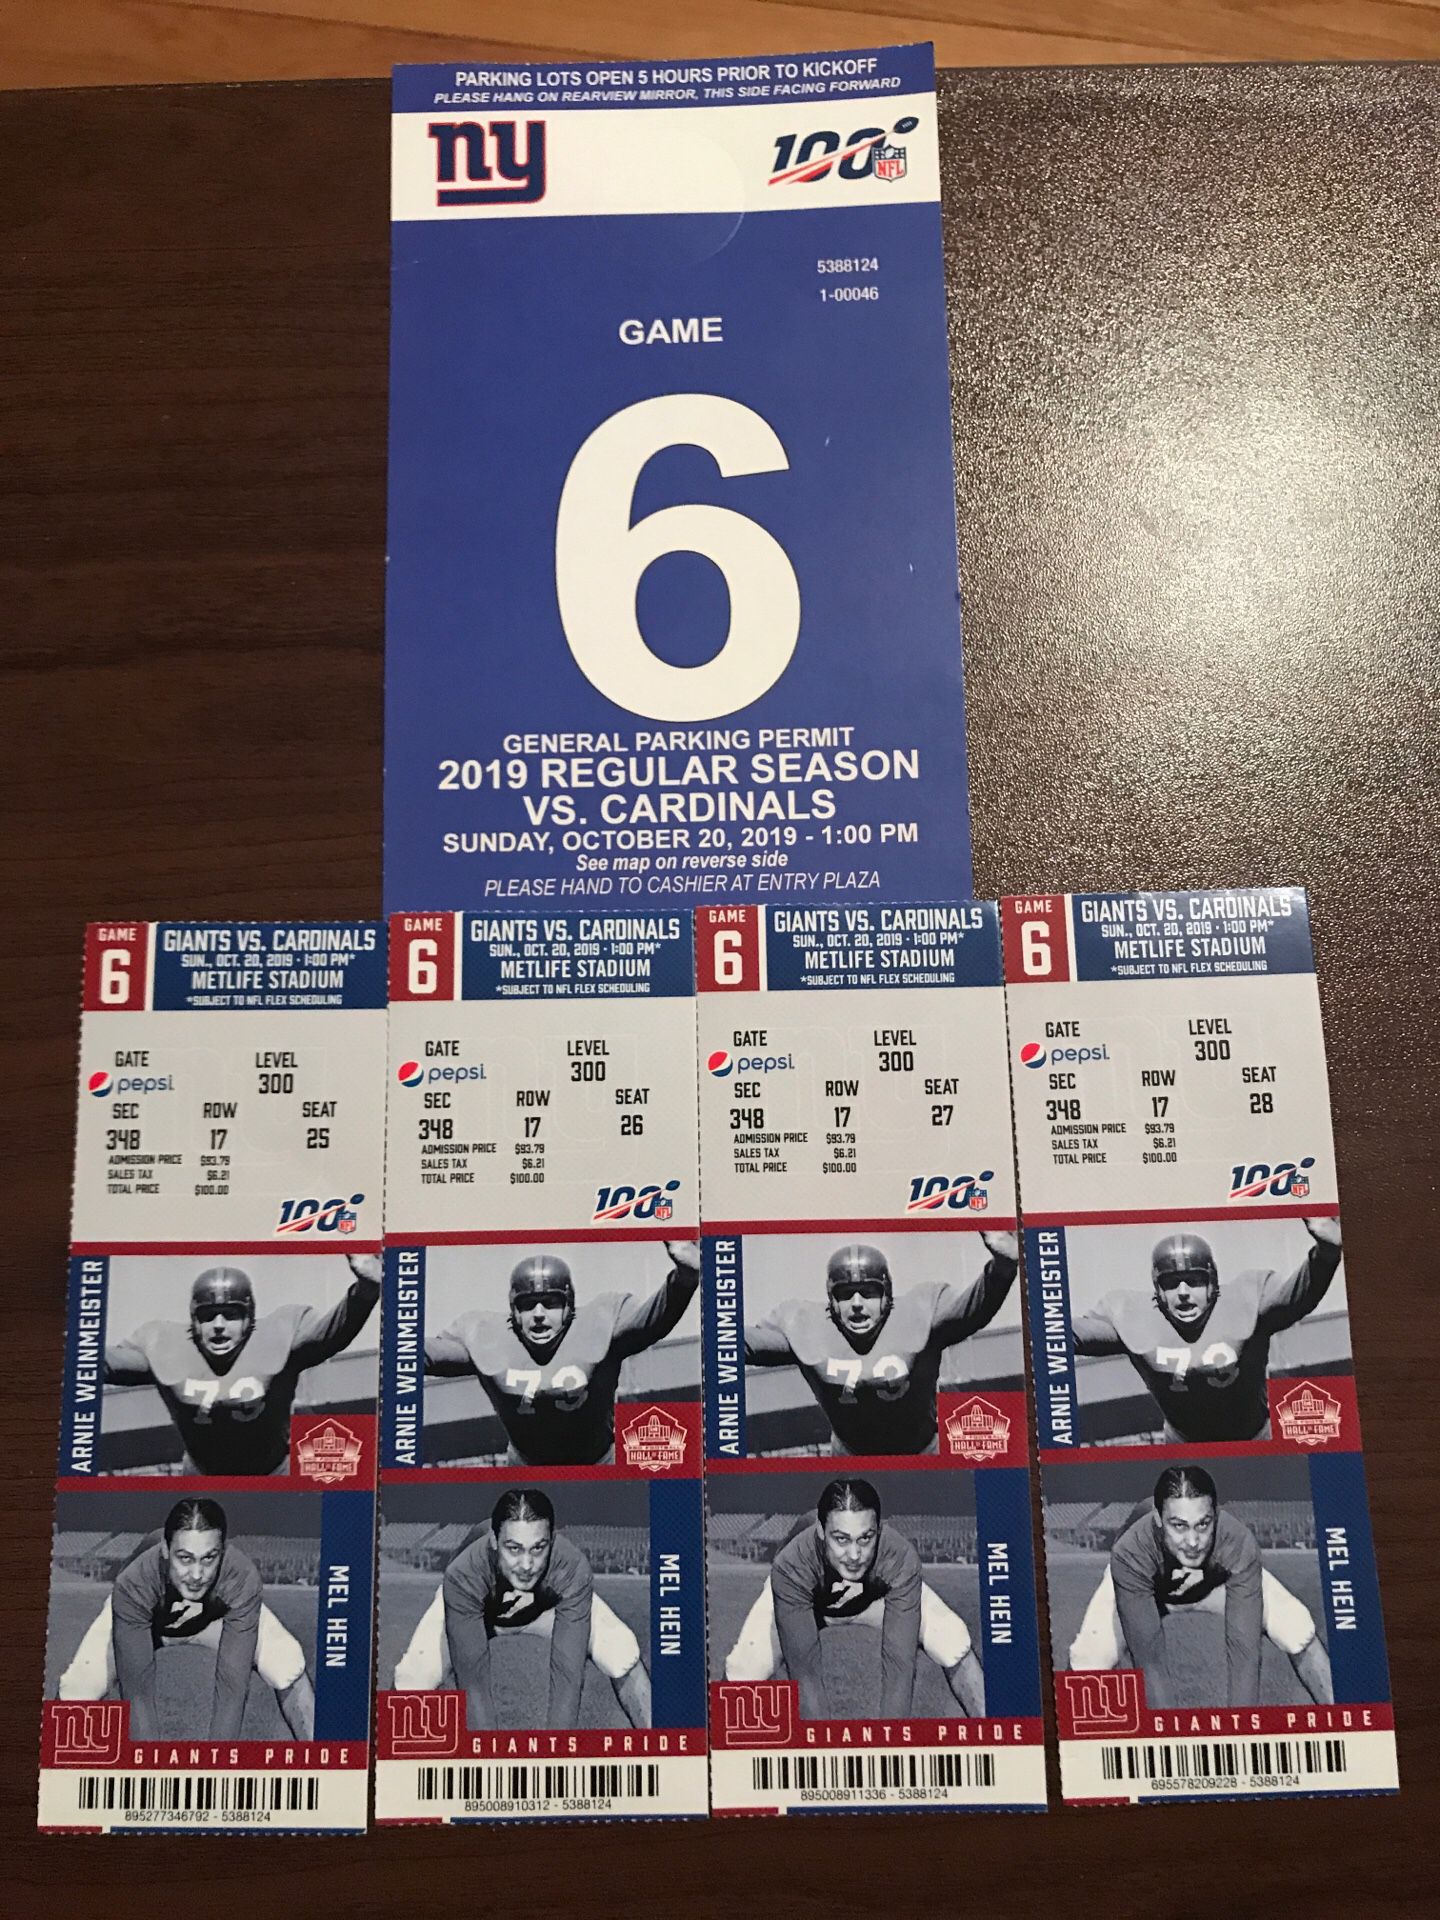 New York Giants tickets October 20 2019 4 Tickets and a parking pass